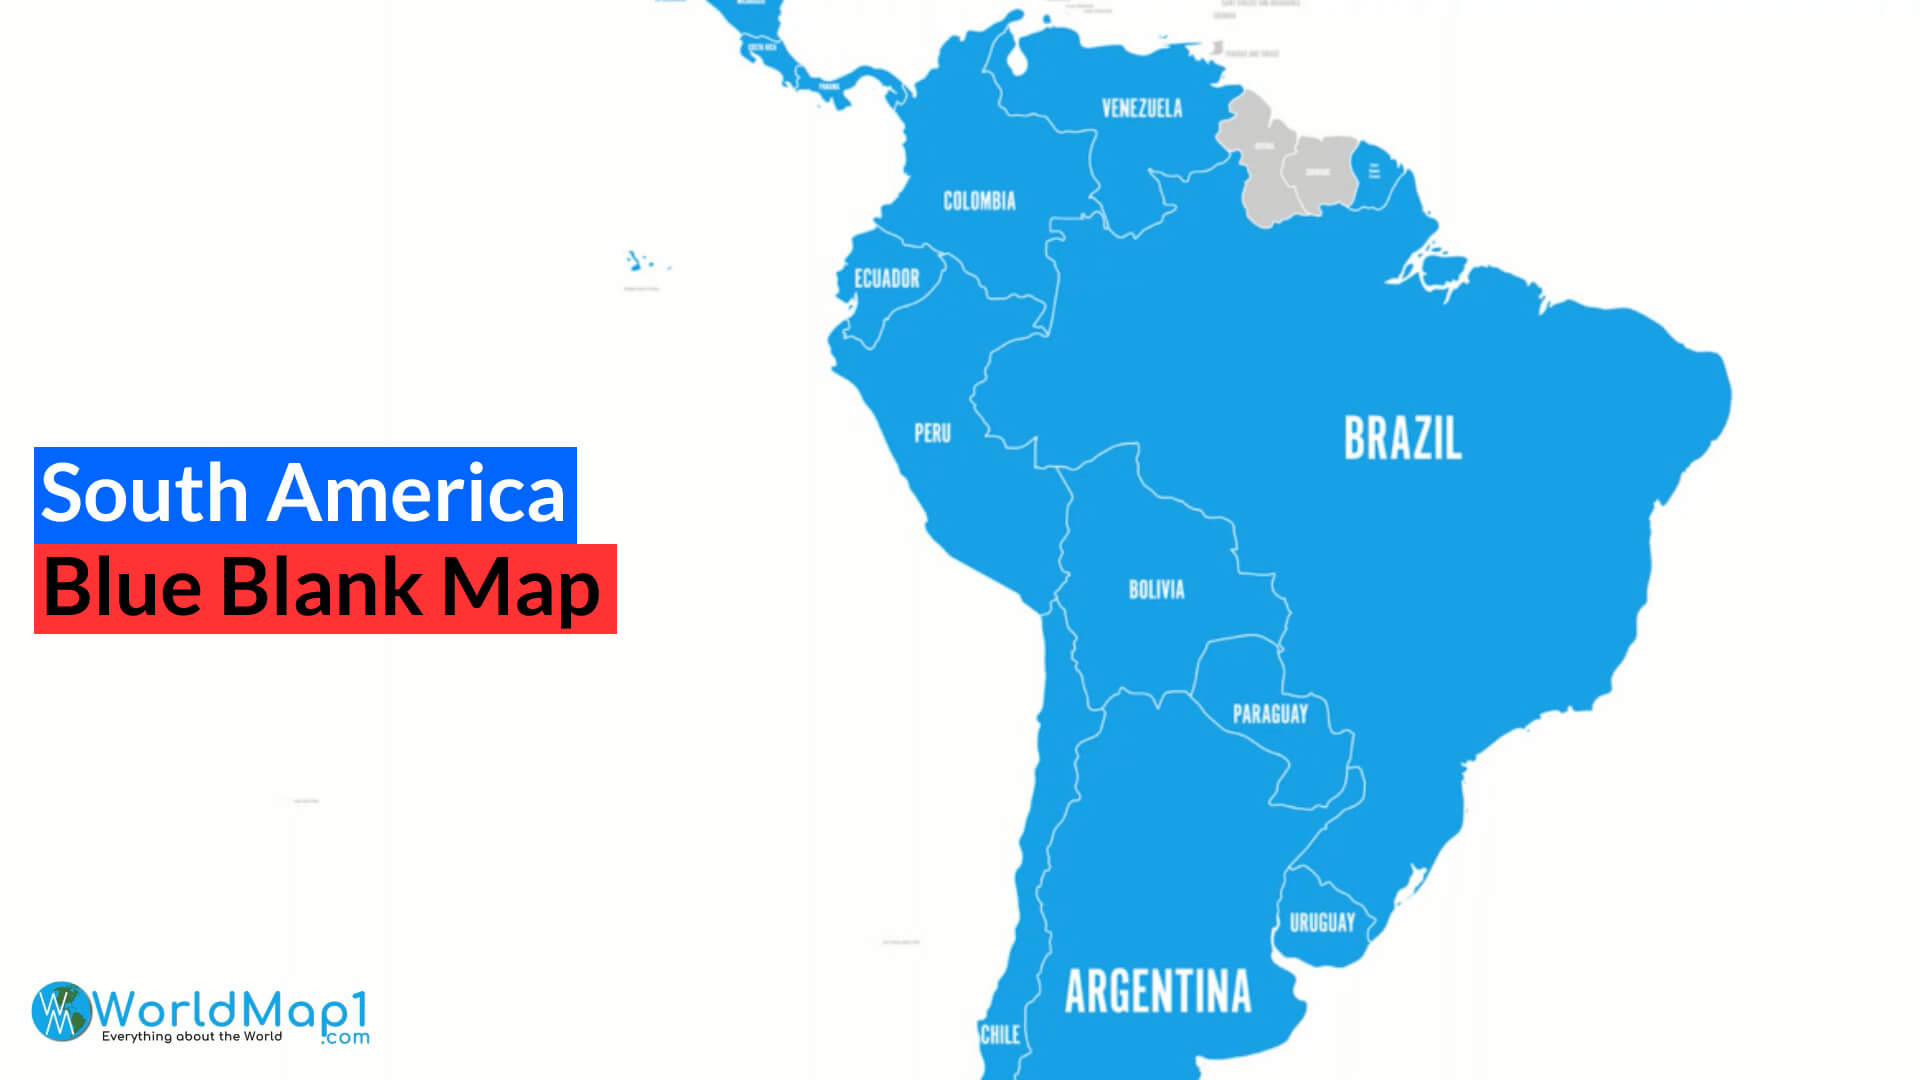 Blue Blank Map of South America